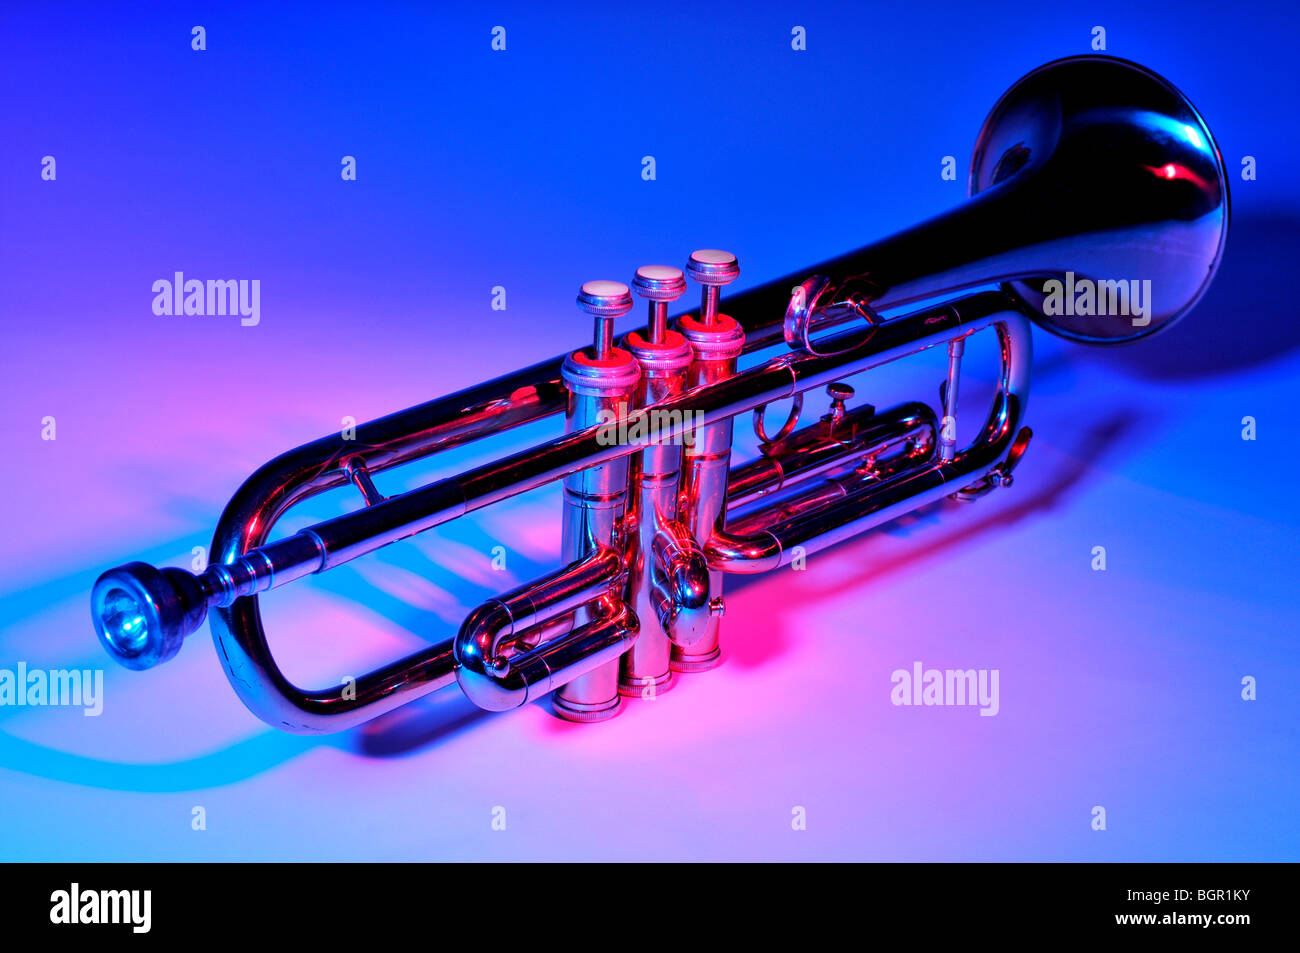 Trumpet under coloured lighting showing the mouth piece in the foreground and the bell in the background. Stock Photo